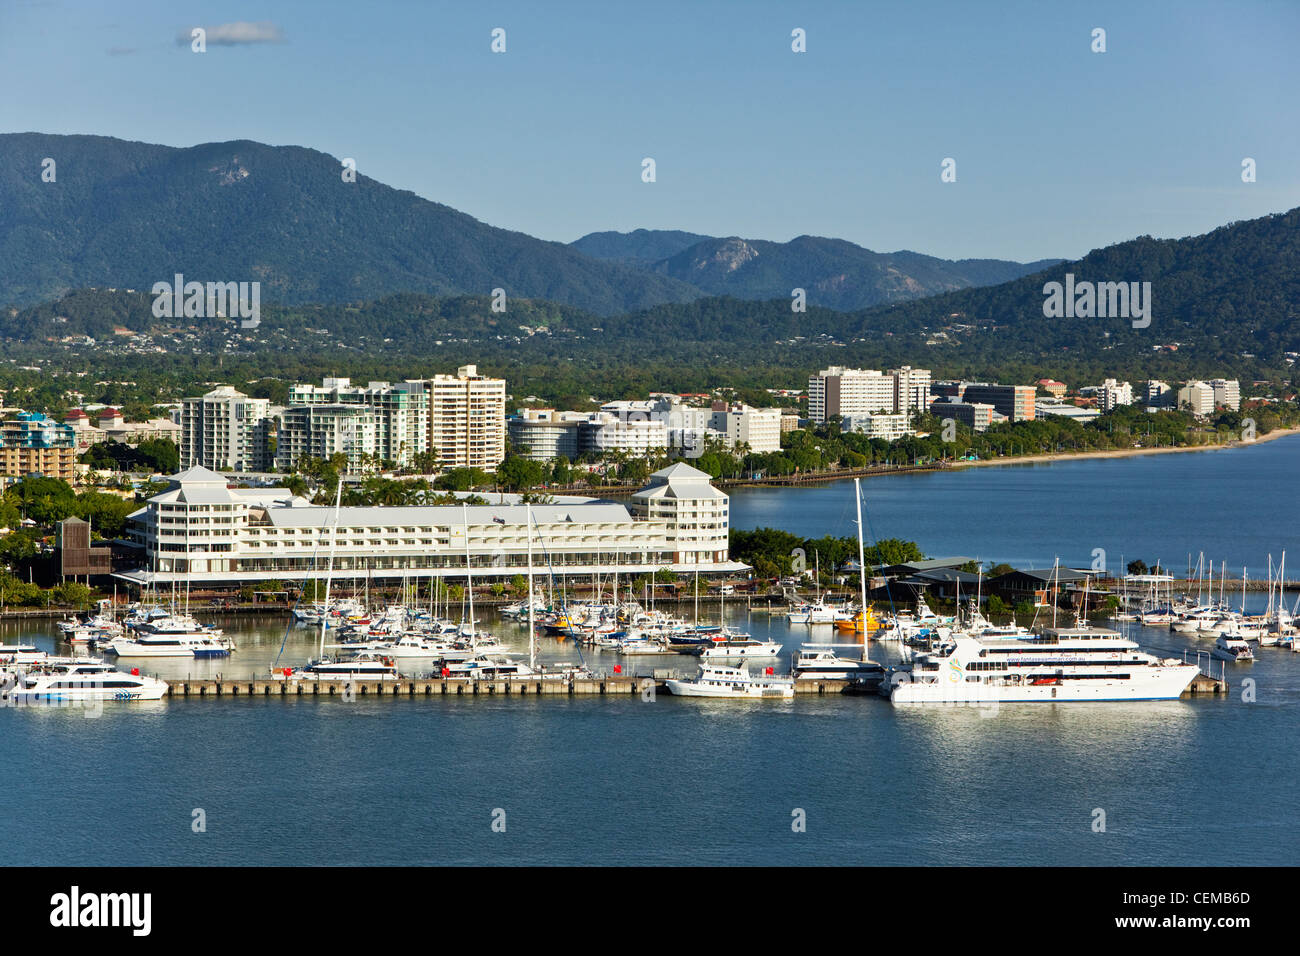 Aerial view of Marlin Marina and city centre. Cairns, Queensland, Australia Stock Photo